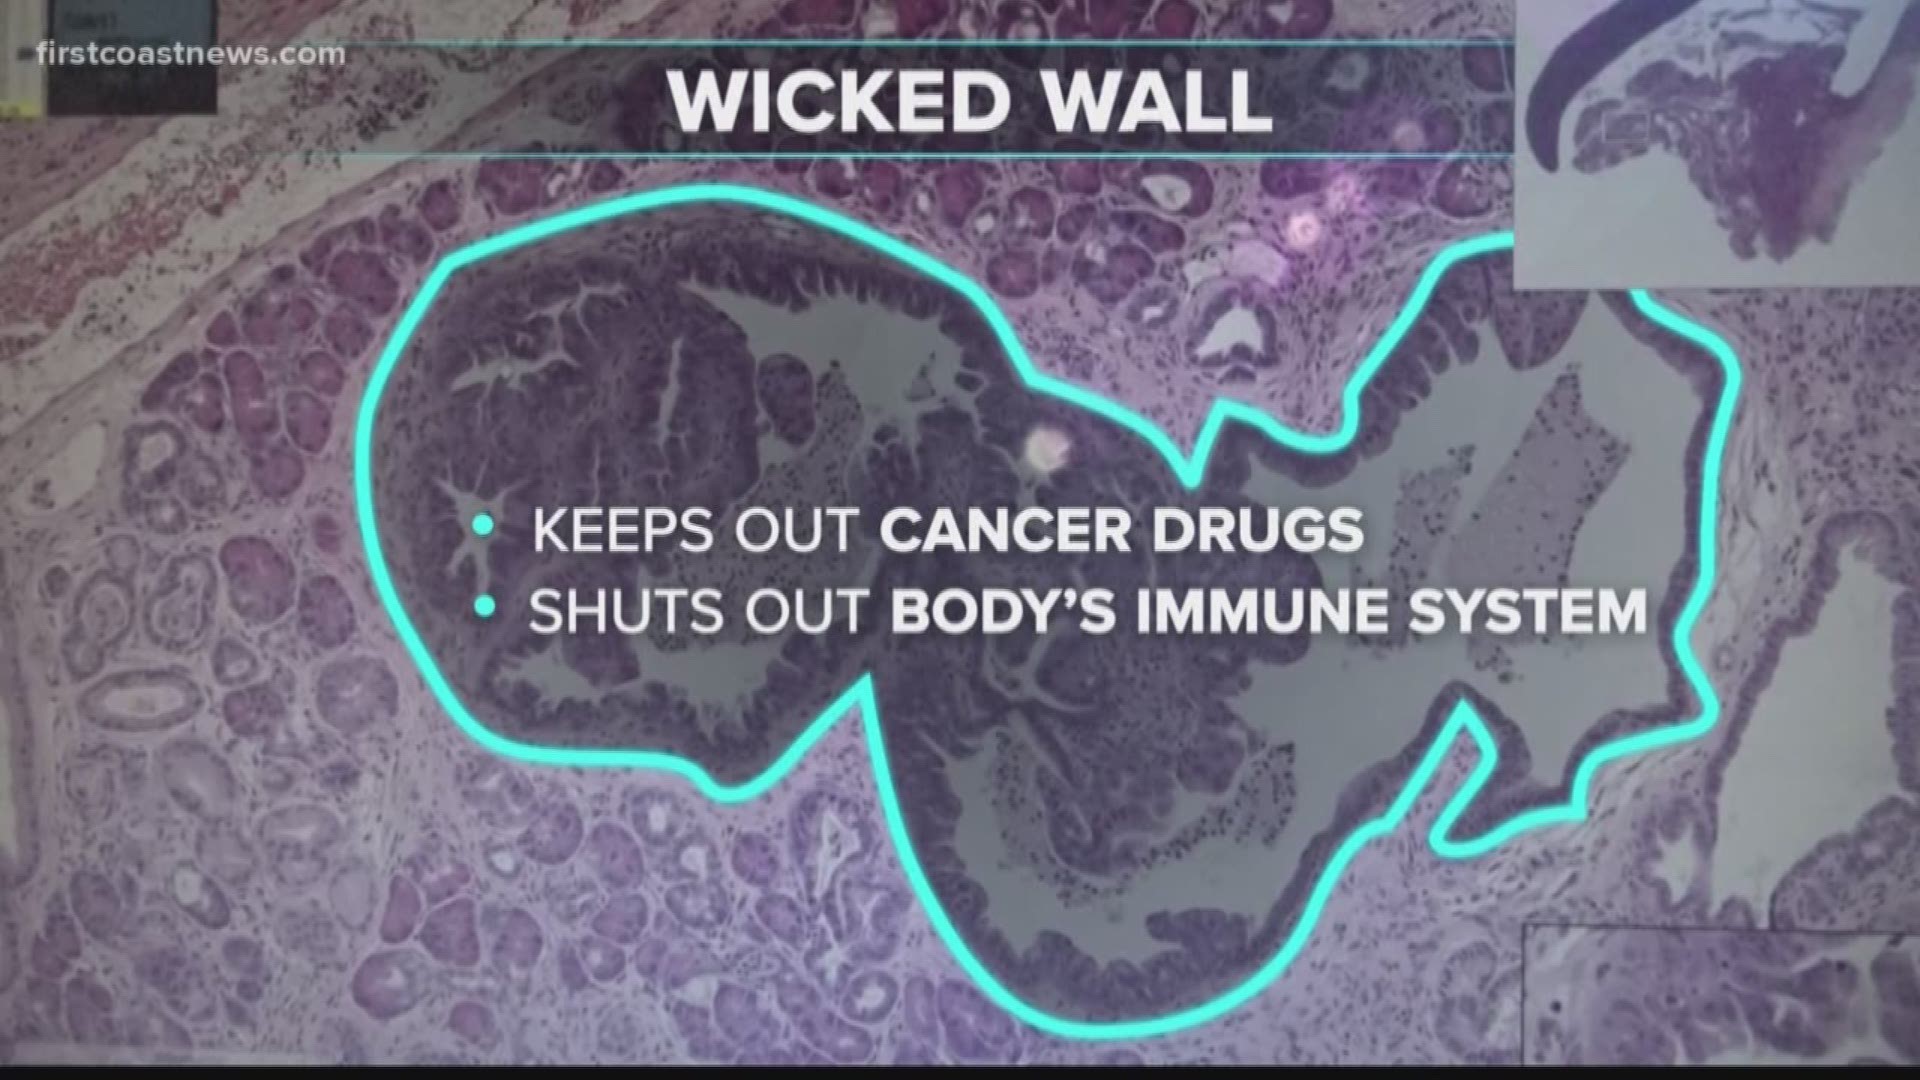 We go to Mayo Clinic-Jacksonville and talk with researchers about the 'Wicked Wall.'